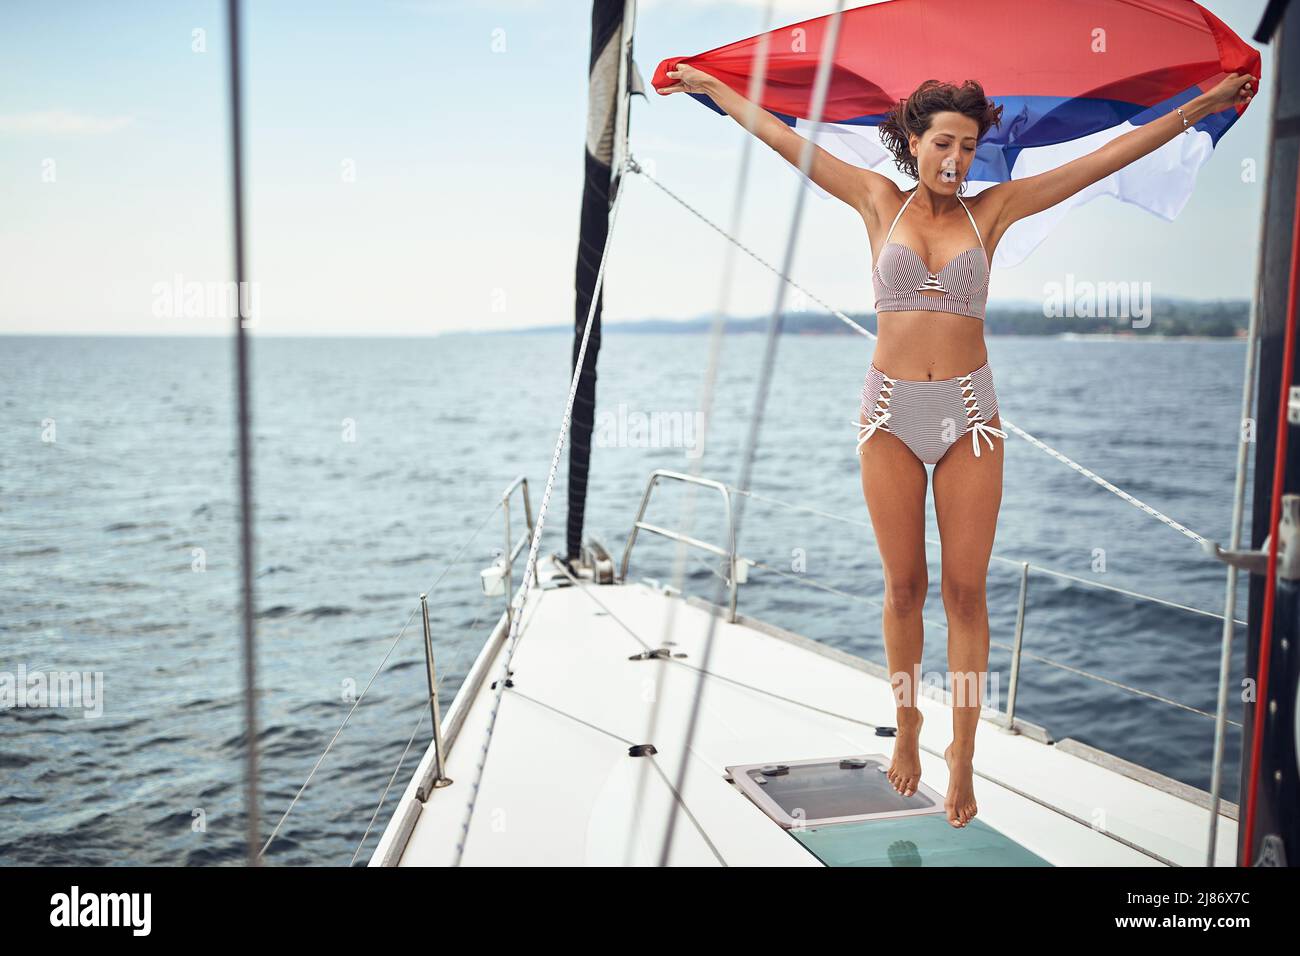 A young sexy girl is holding a flag and jumping while enjoying a ride on a beautiful sunny day on a yacht. Summer, sea, vacation Stock Photo